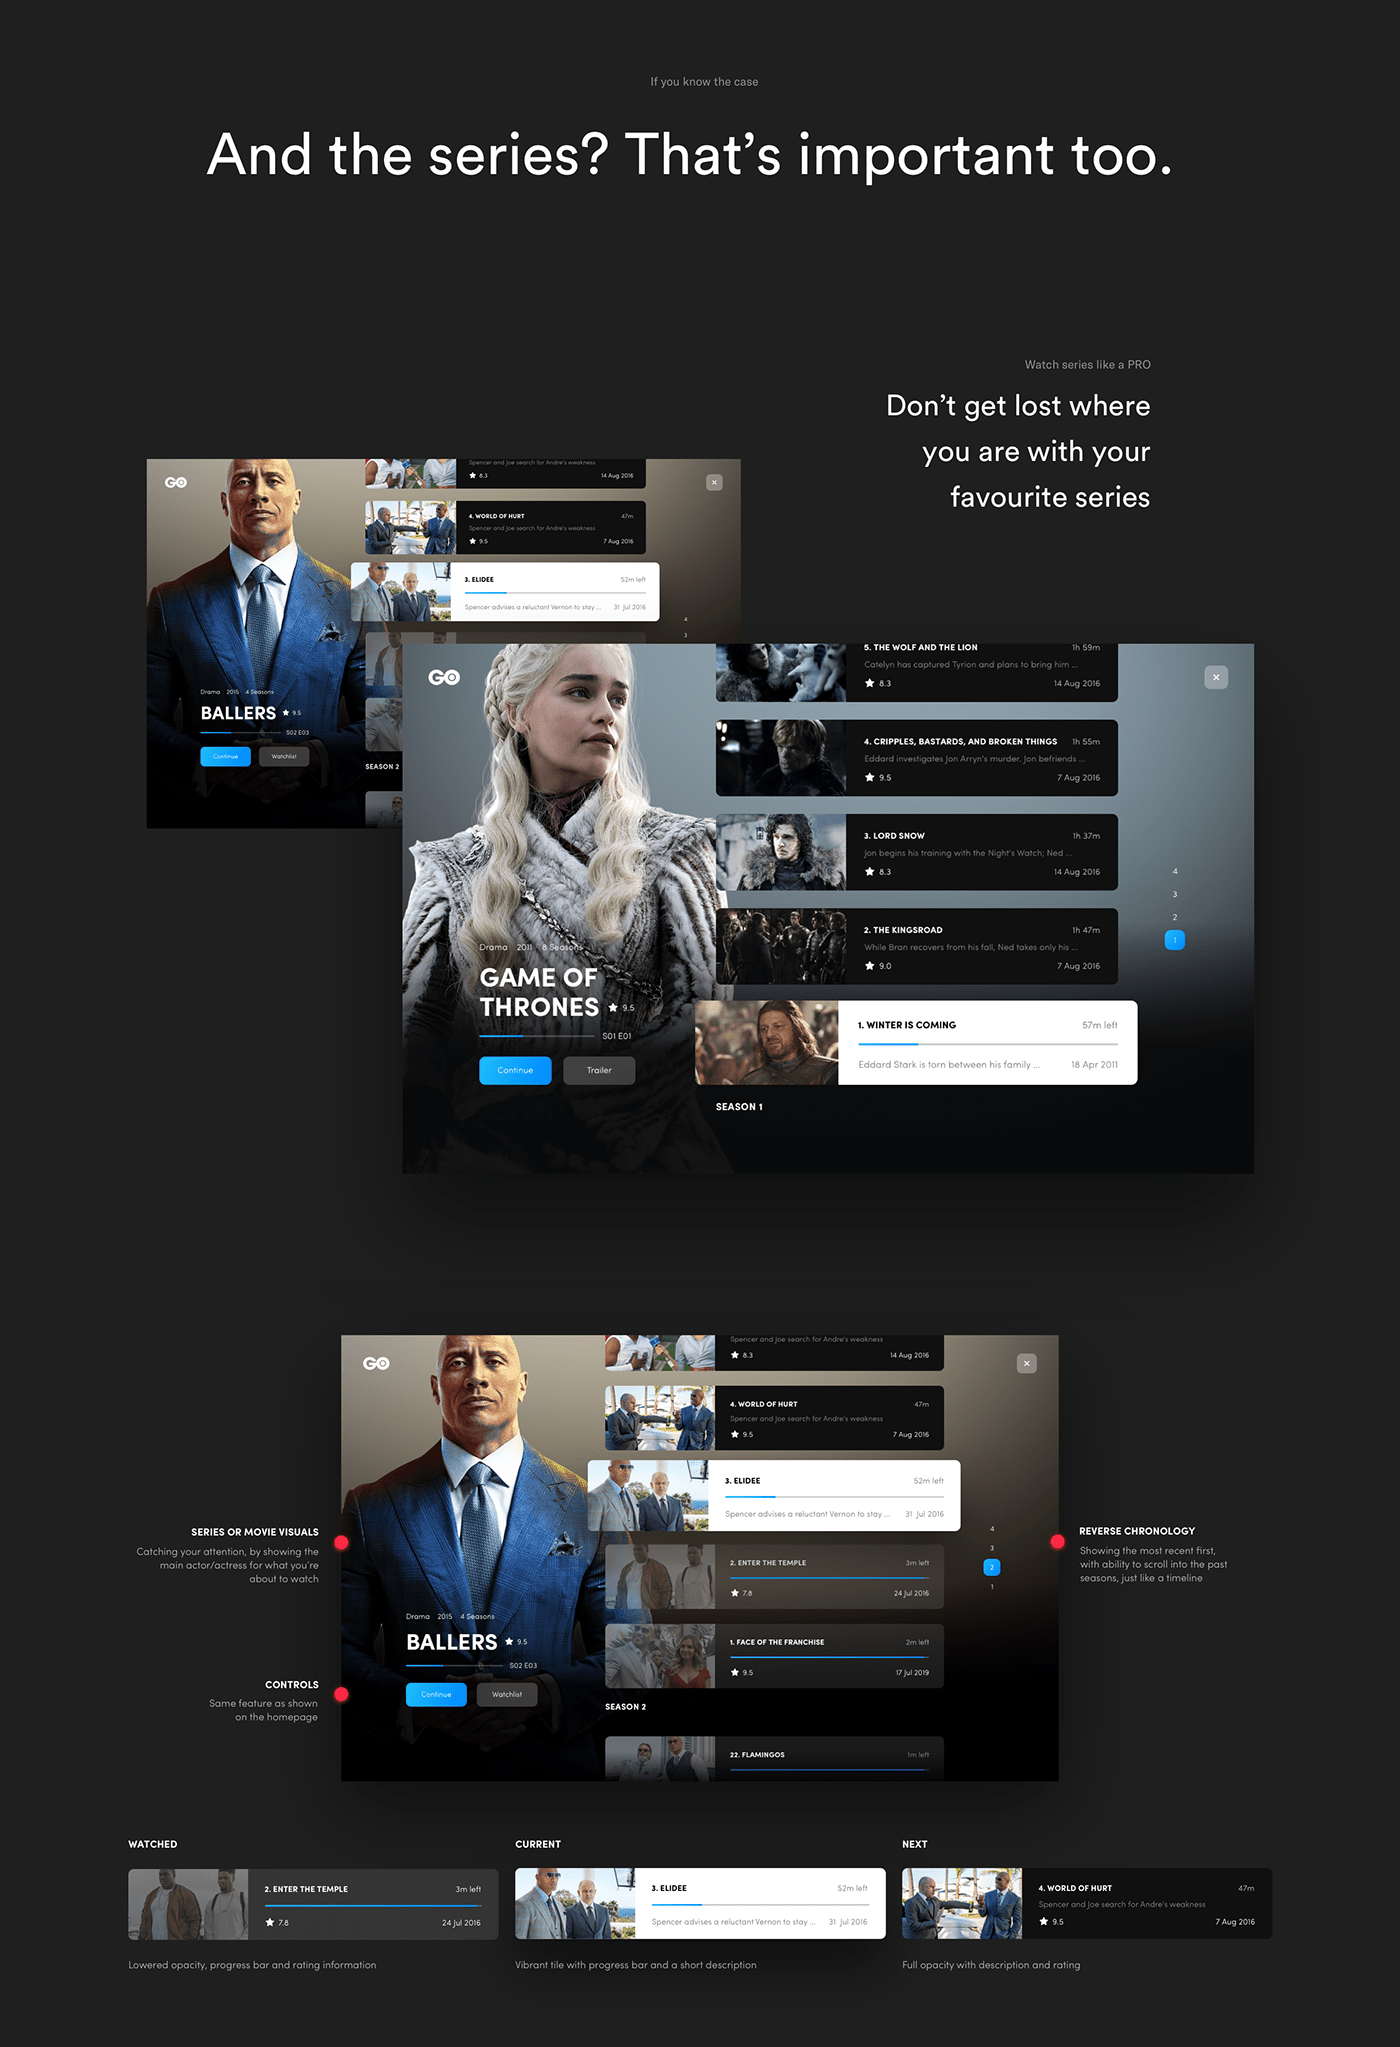 dark ui hbo Movies player redesign Streaming video VOD